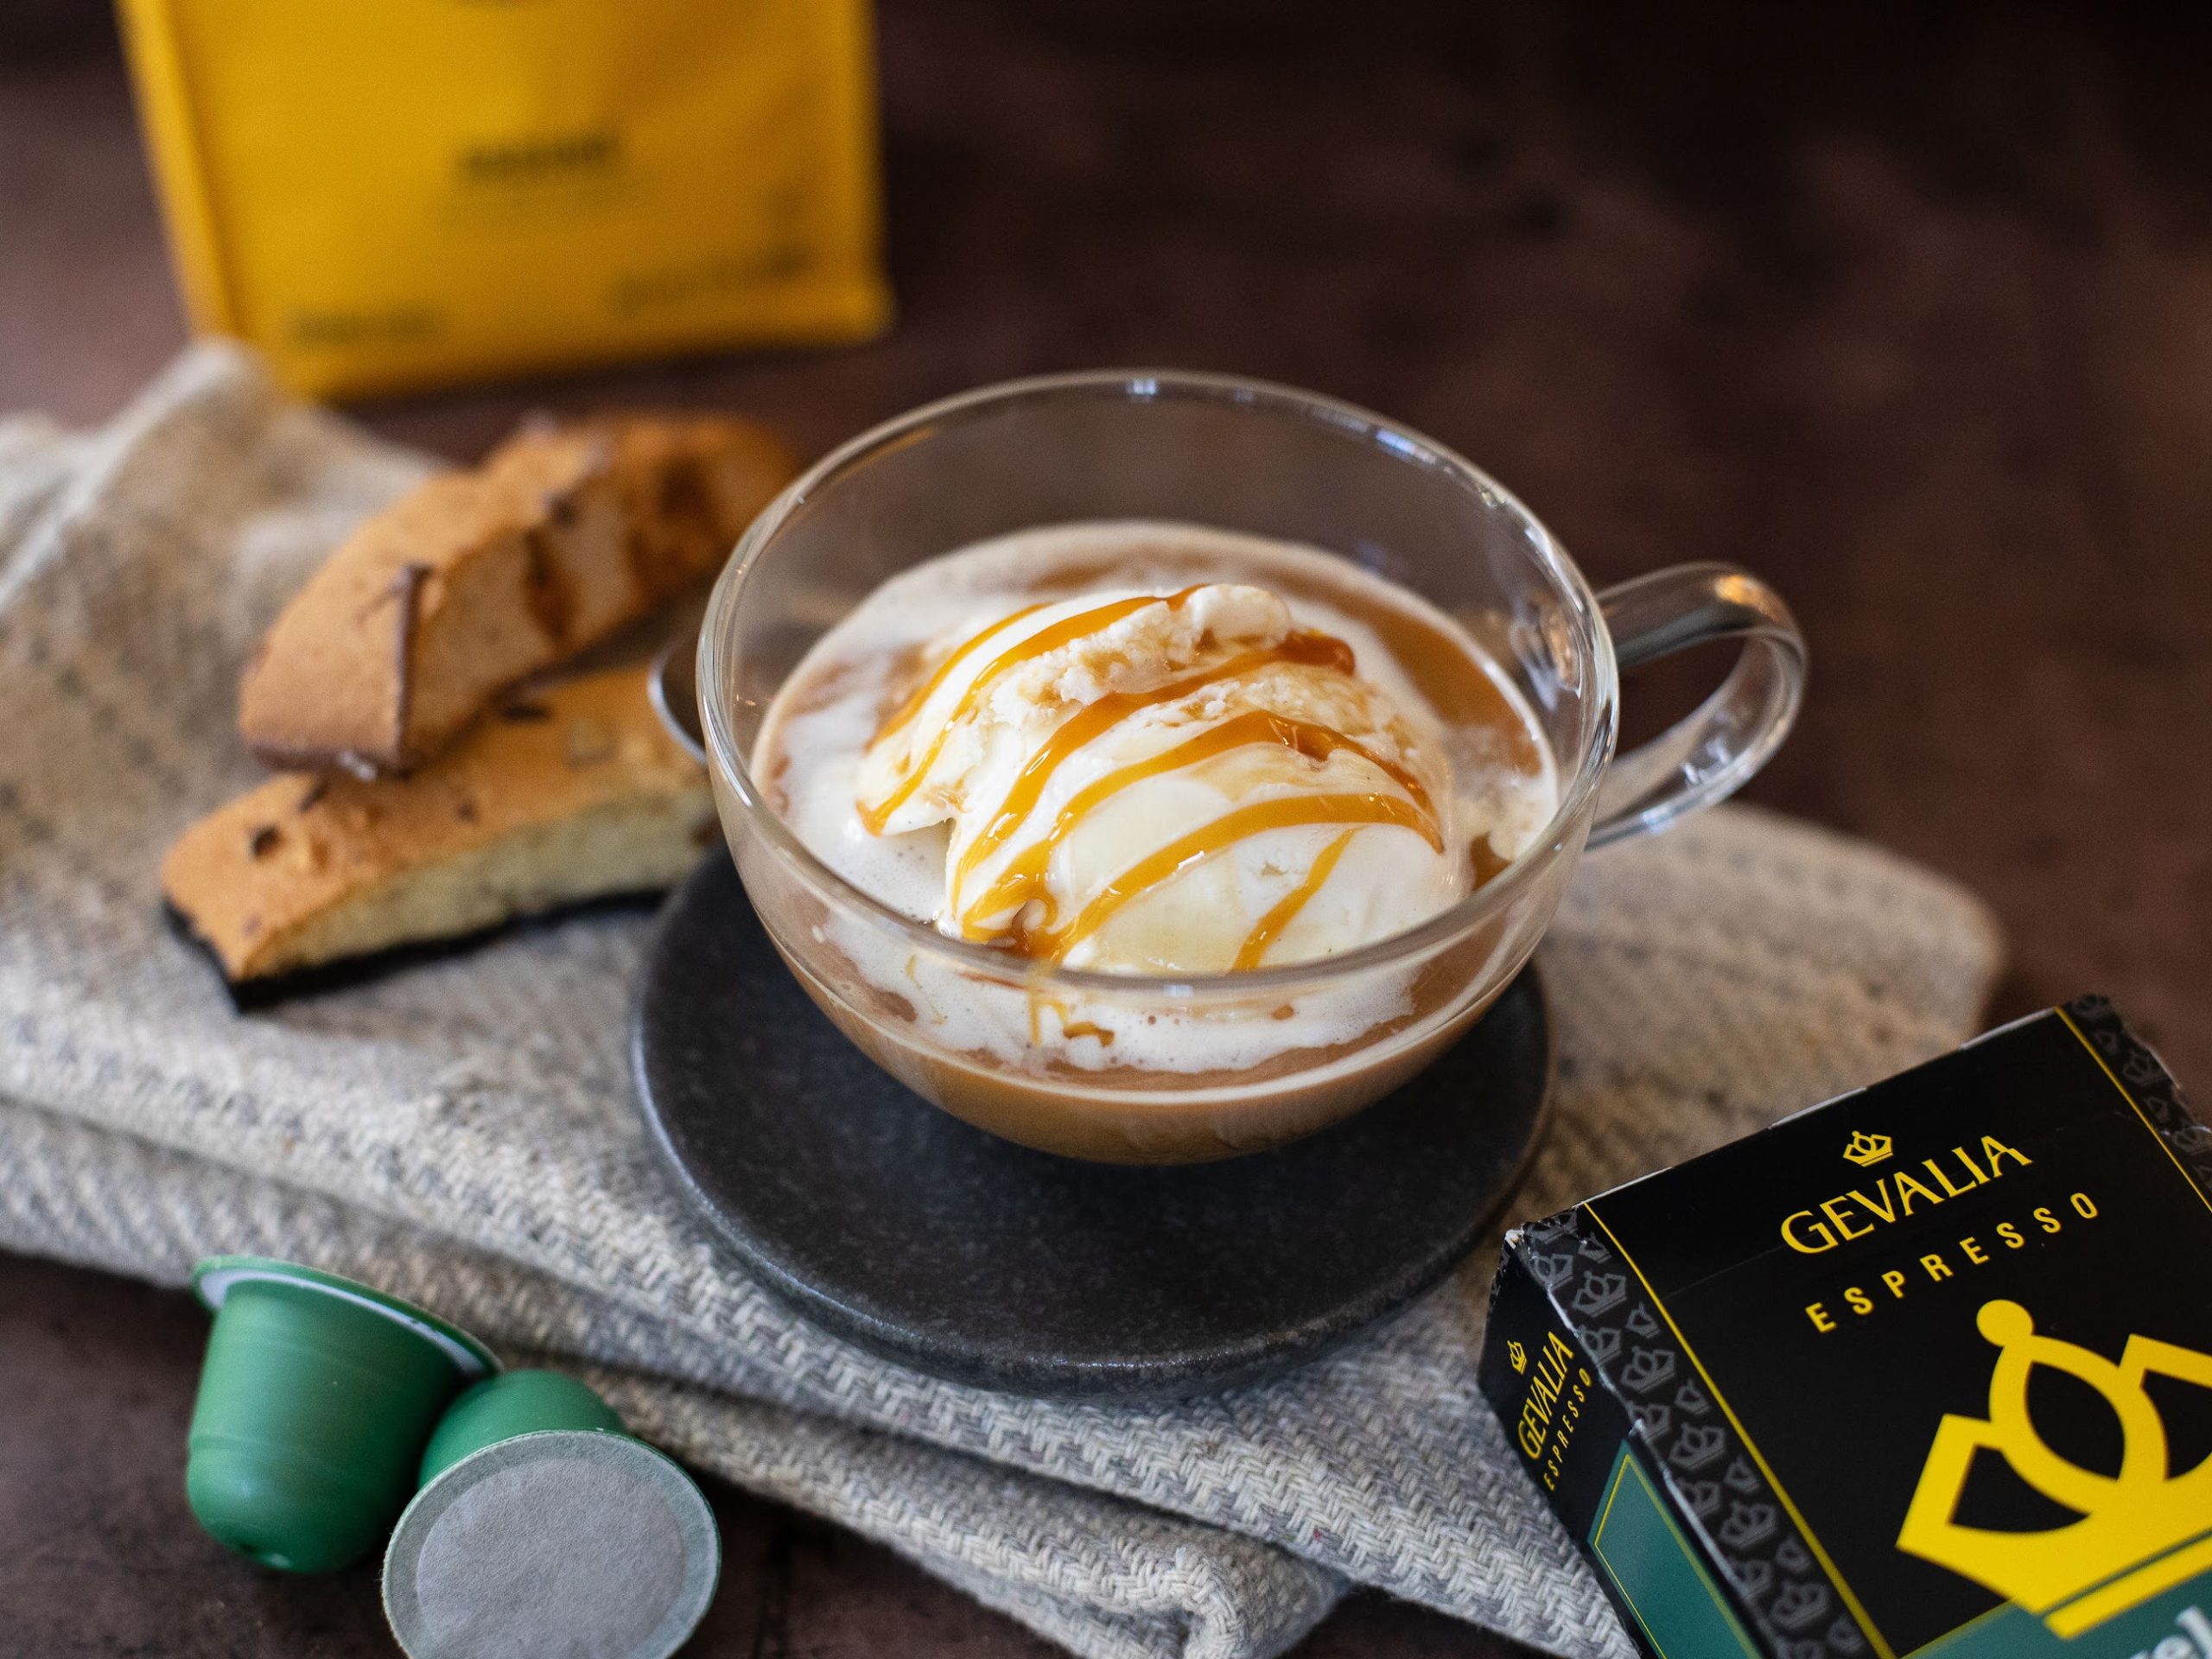 Serve Up This Easy Gevalia Affogato For The Perfect Quick Holiday Dessert! on I Heart Publix